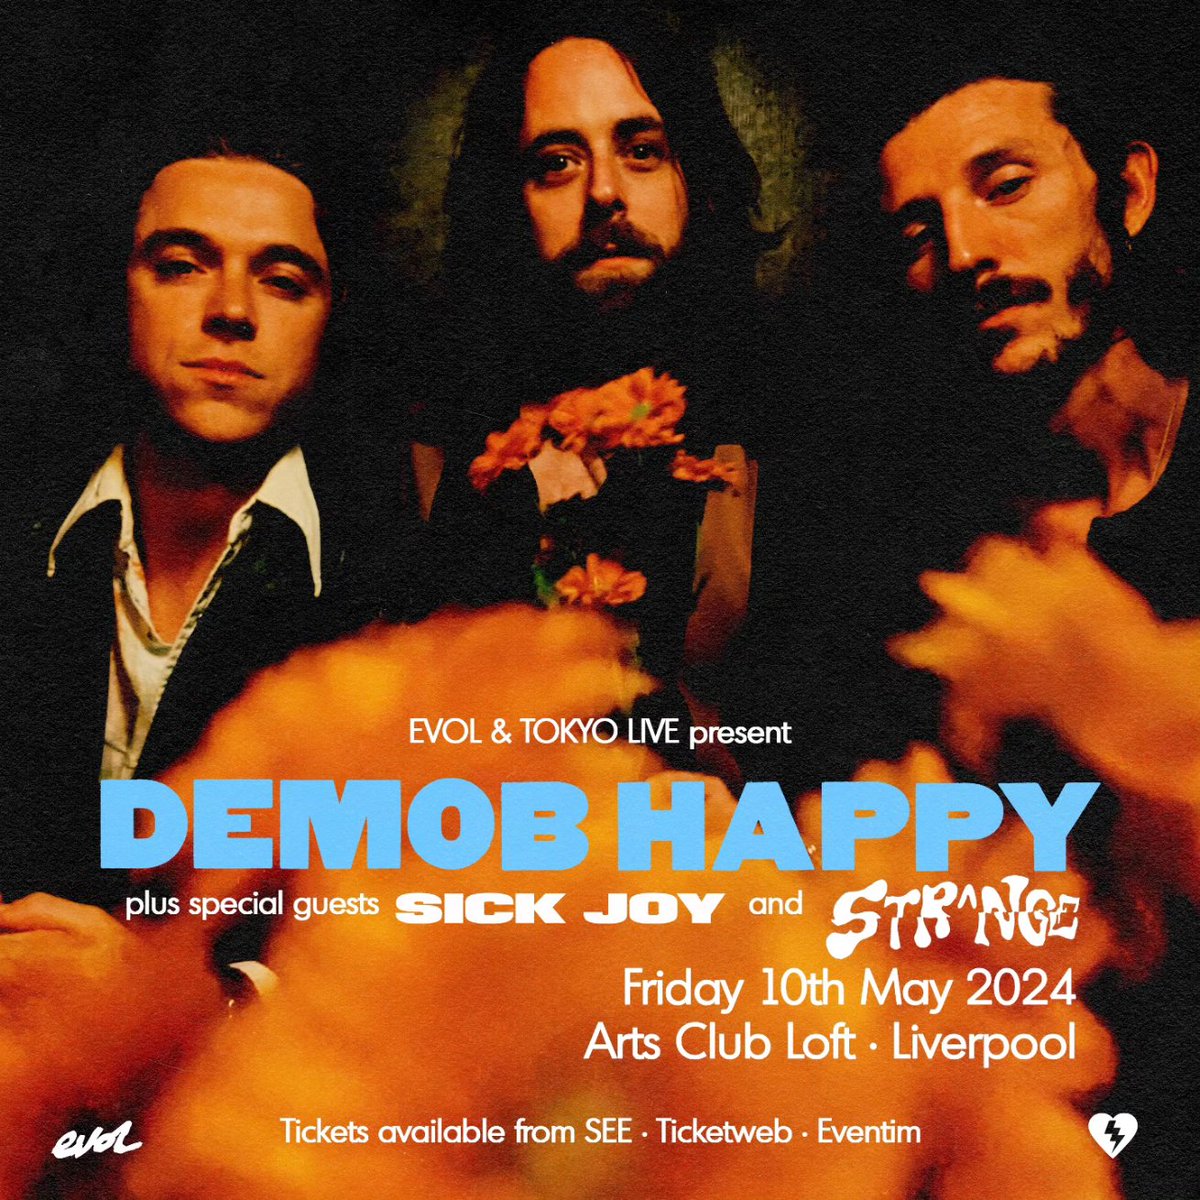 𝐂𝐎𝐌𝐈𝐍𝐆 𝐔𝐏 Blisteringly magnificent rock 'n' rollers @DemobHappy hit @artsclublpool Loft, Friday May 10th with special guests @sickjoyband and @band_strange. Get amongst it for this one!! Tickets: seetickets.com/event/demob-ha… 📸 @LucyMcLachlan_ last time out in Liverpool